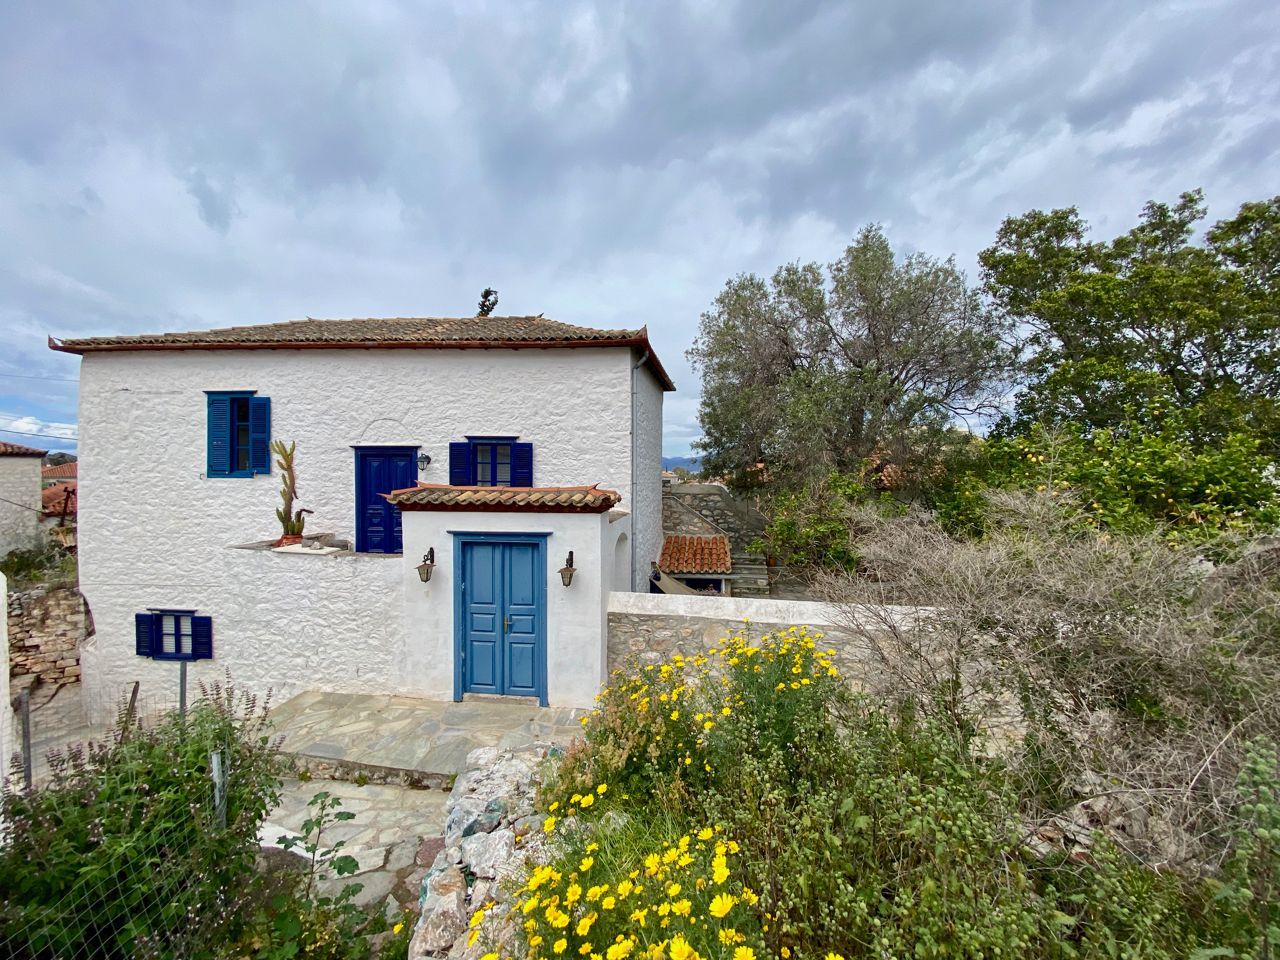 Detached house for sale, property for sale on Hydra Island Greece